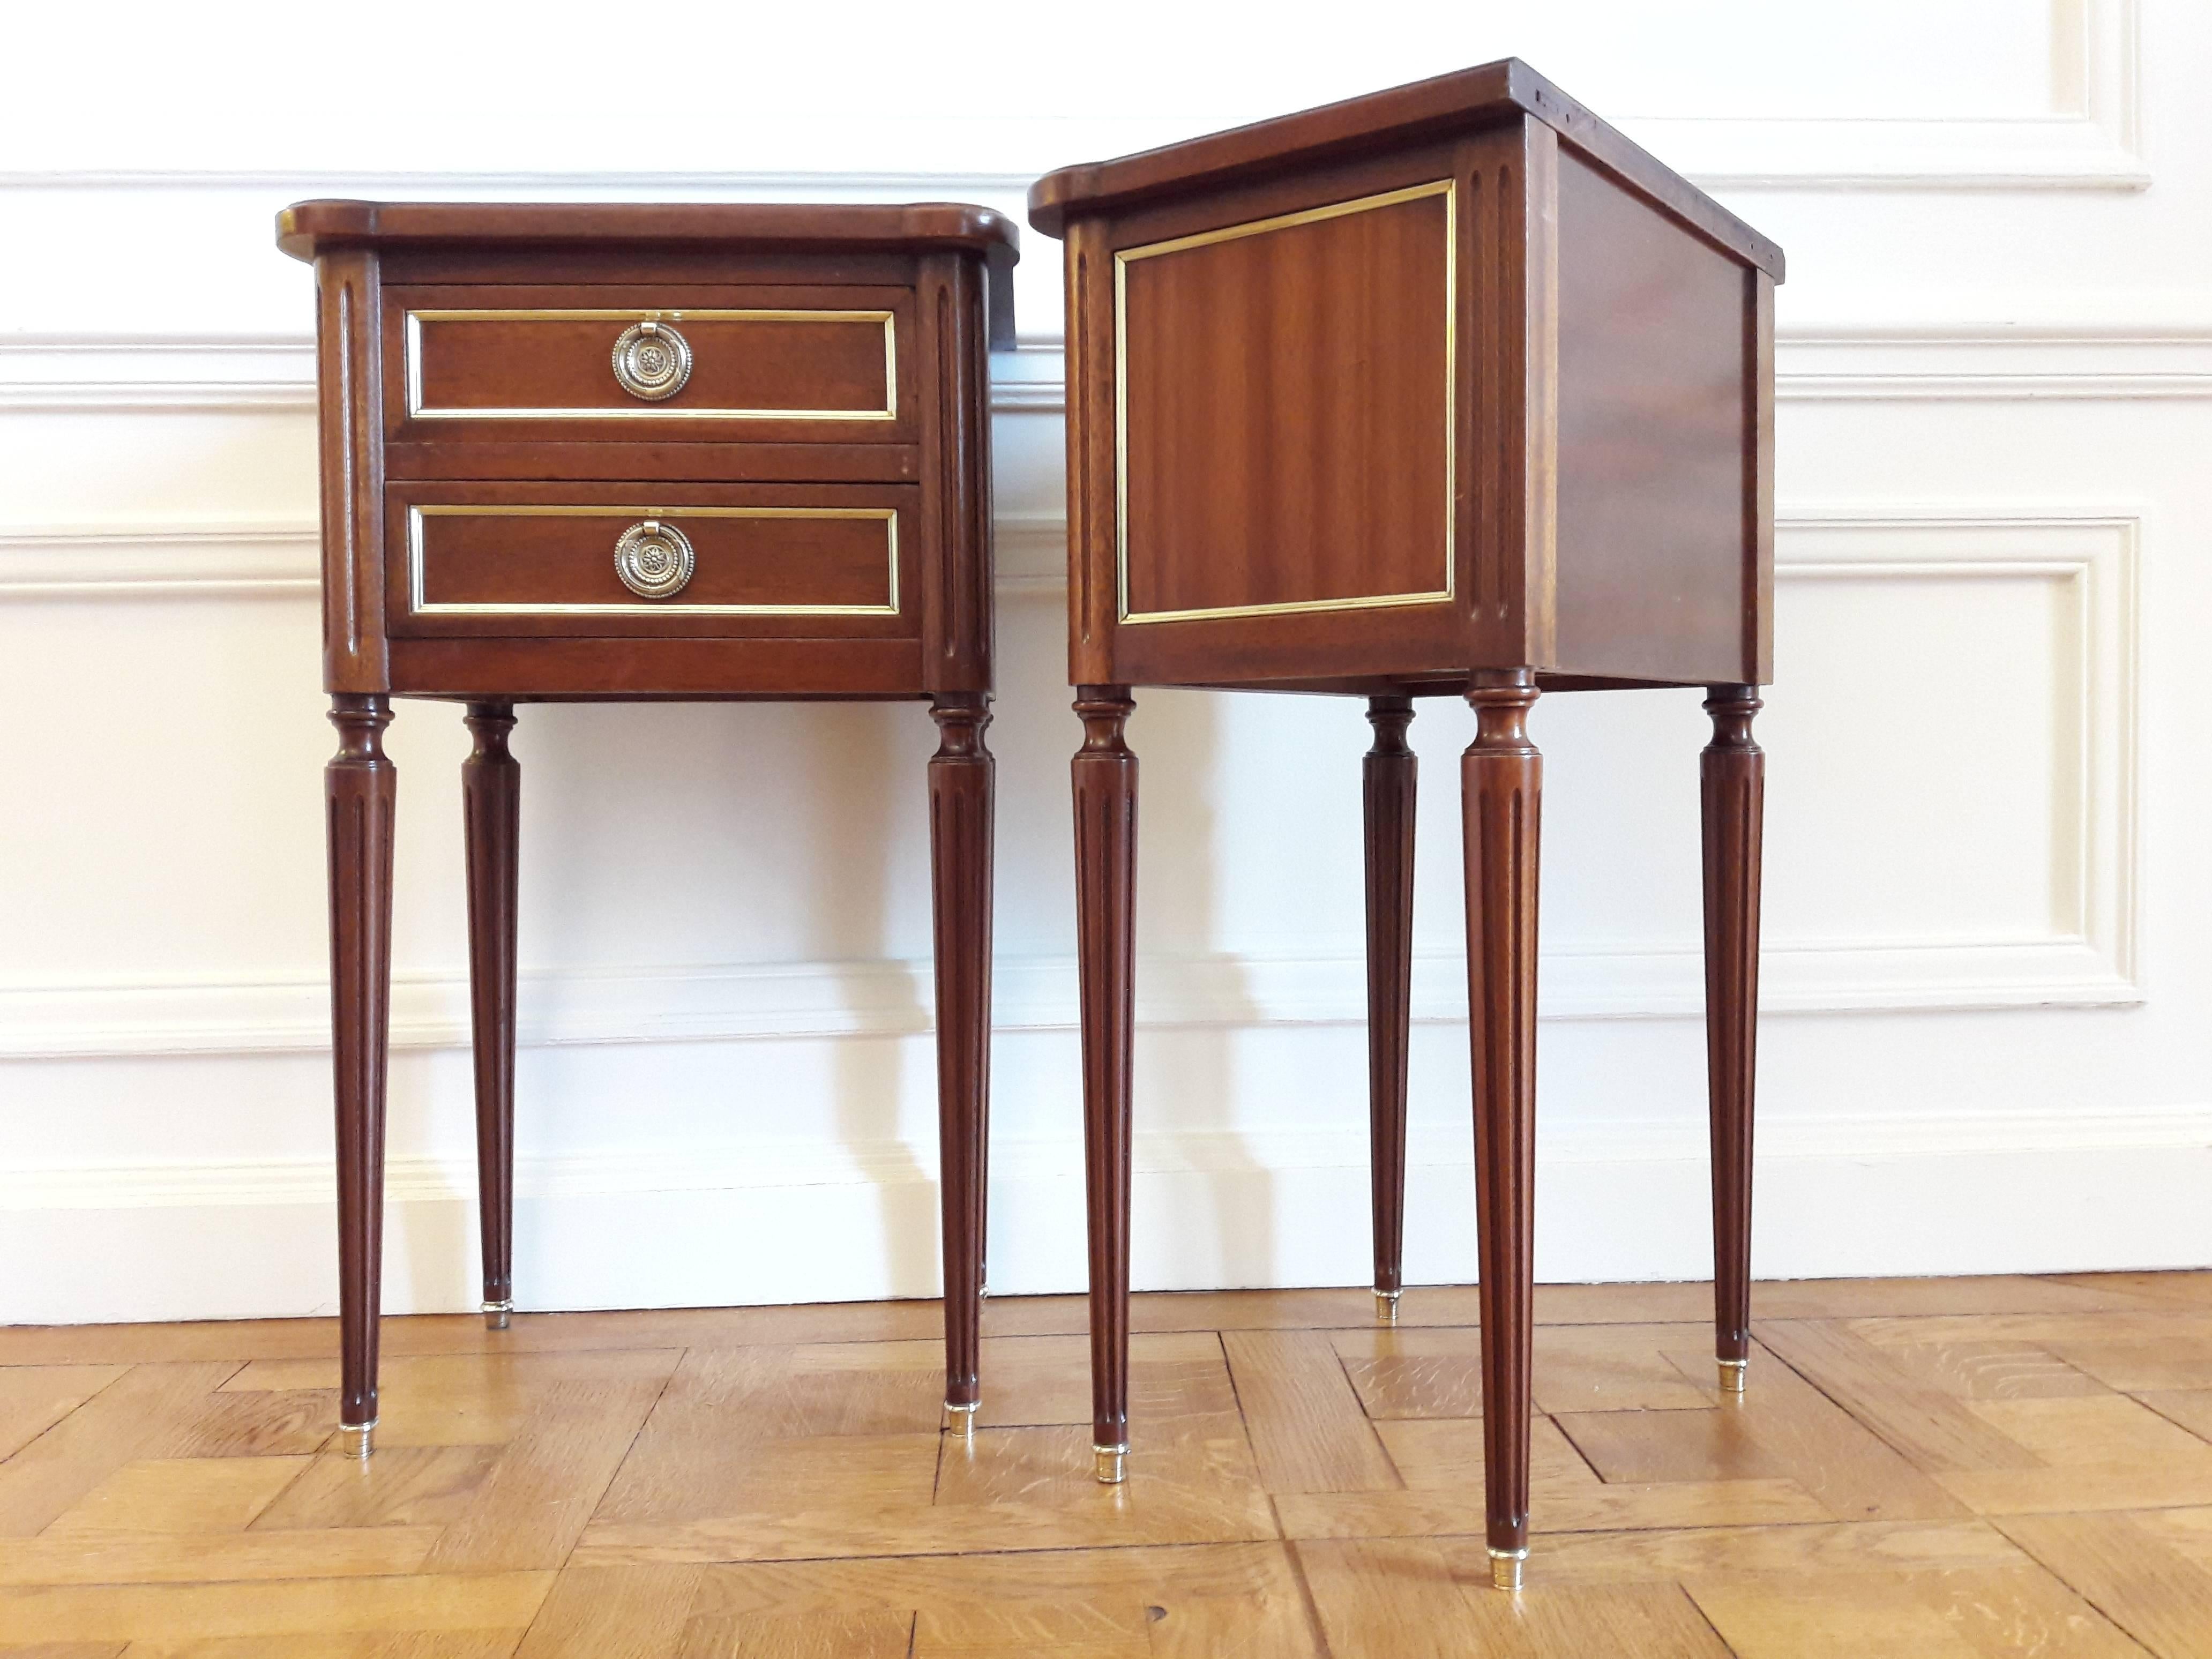 Antique French Louis XVI style pair of nightstands in varnished wood, fluted legs finished with golden bronze clogs. 
Two dovetailed small drawers with brass details.